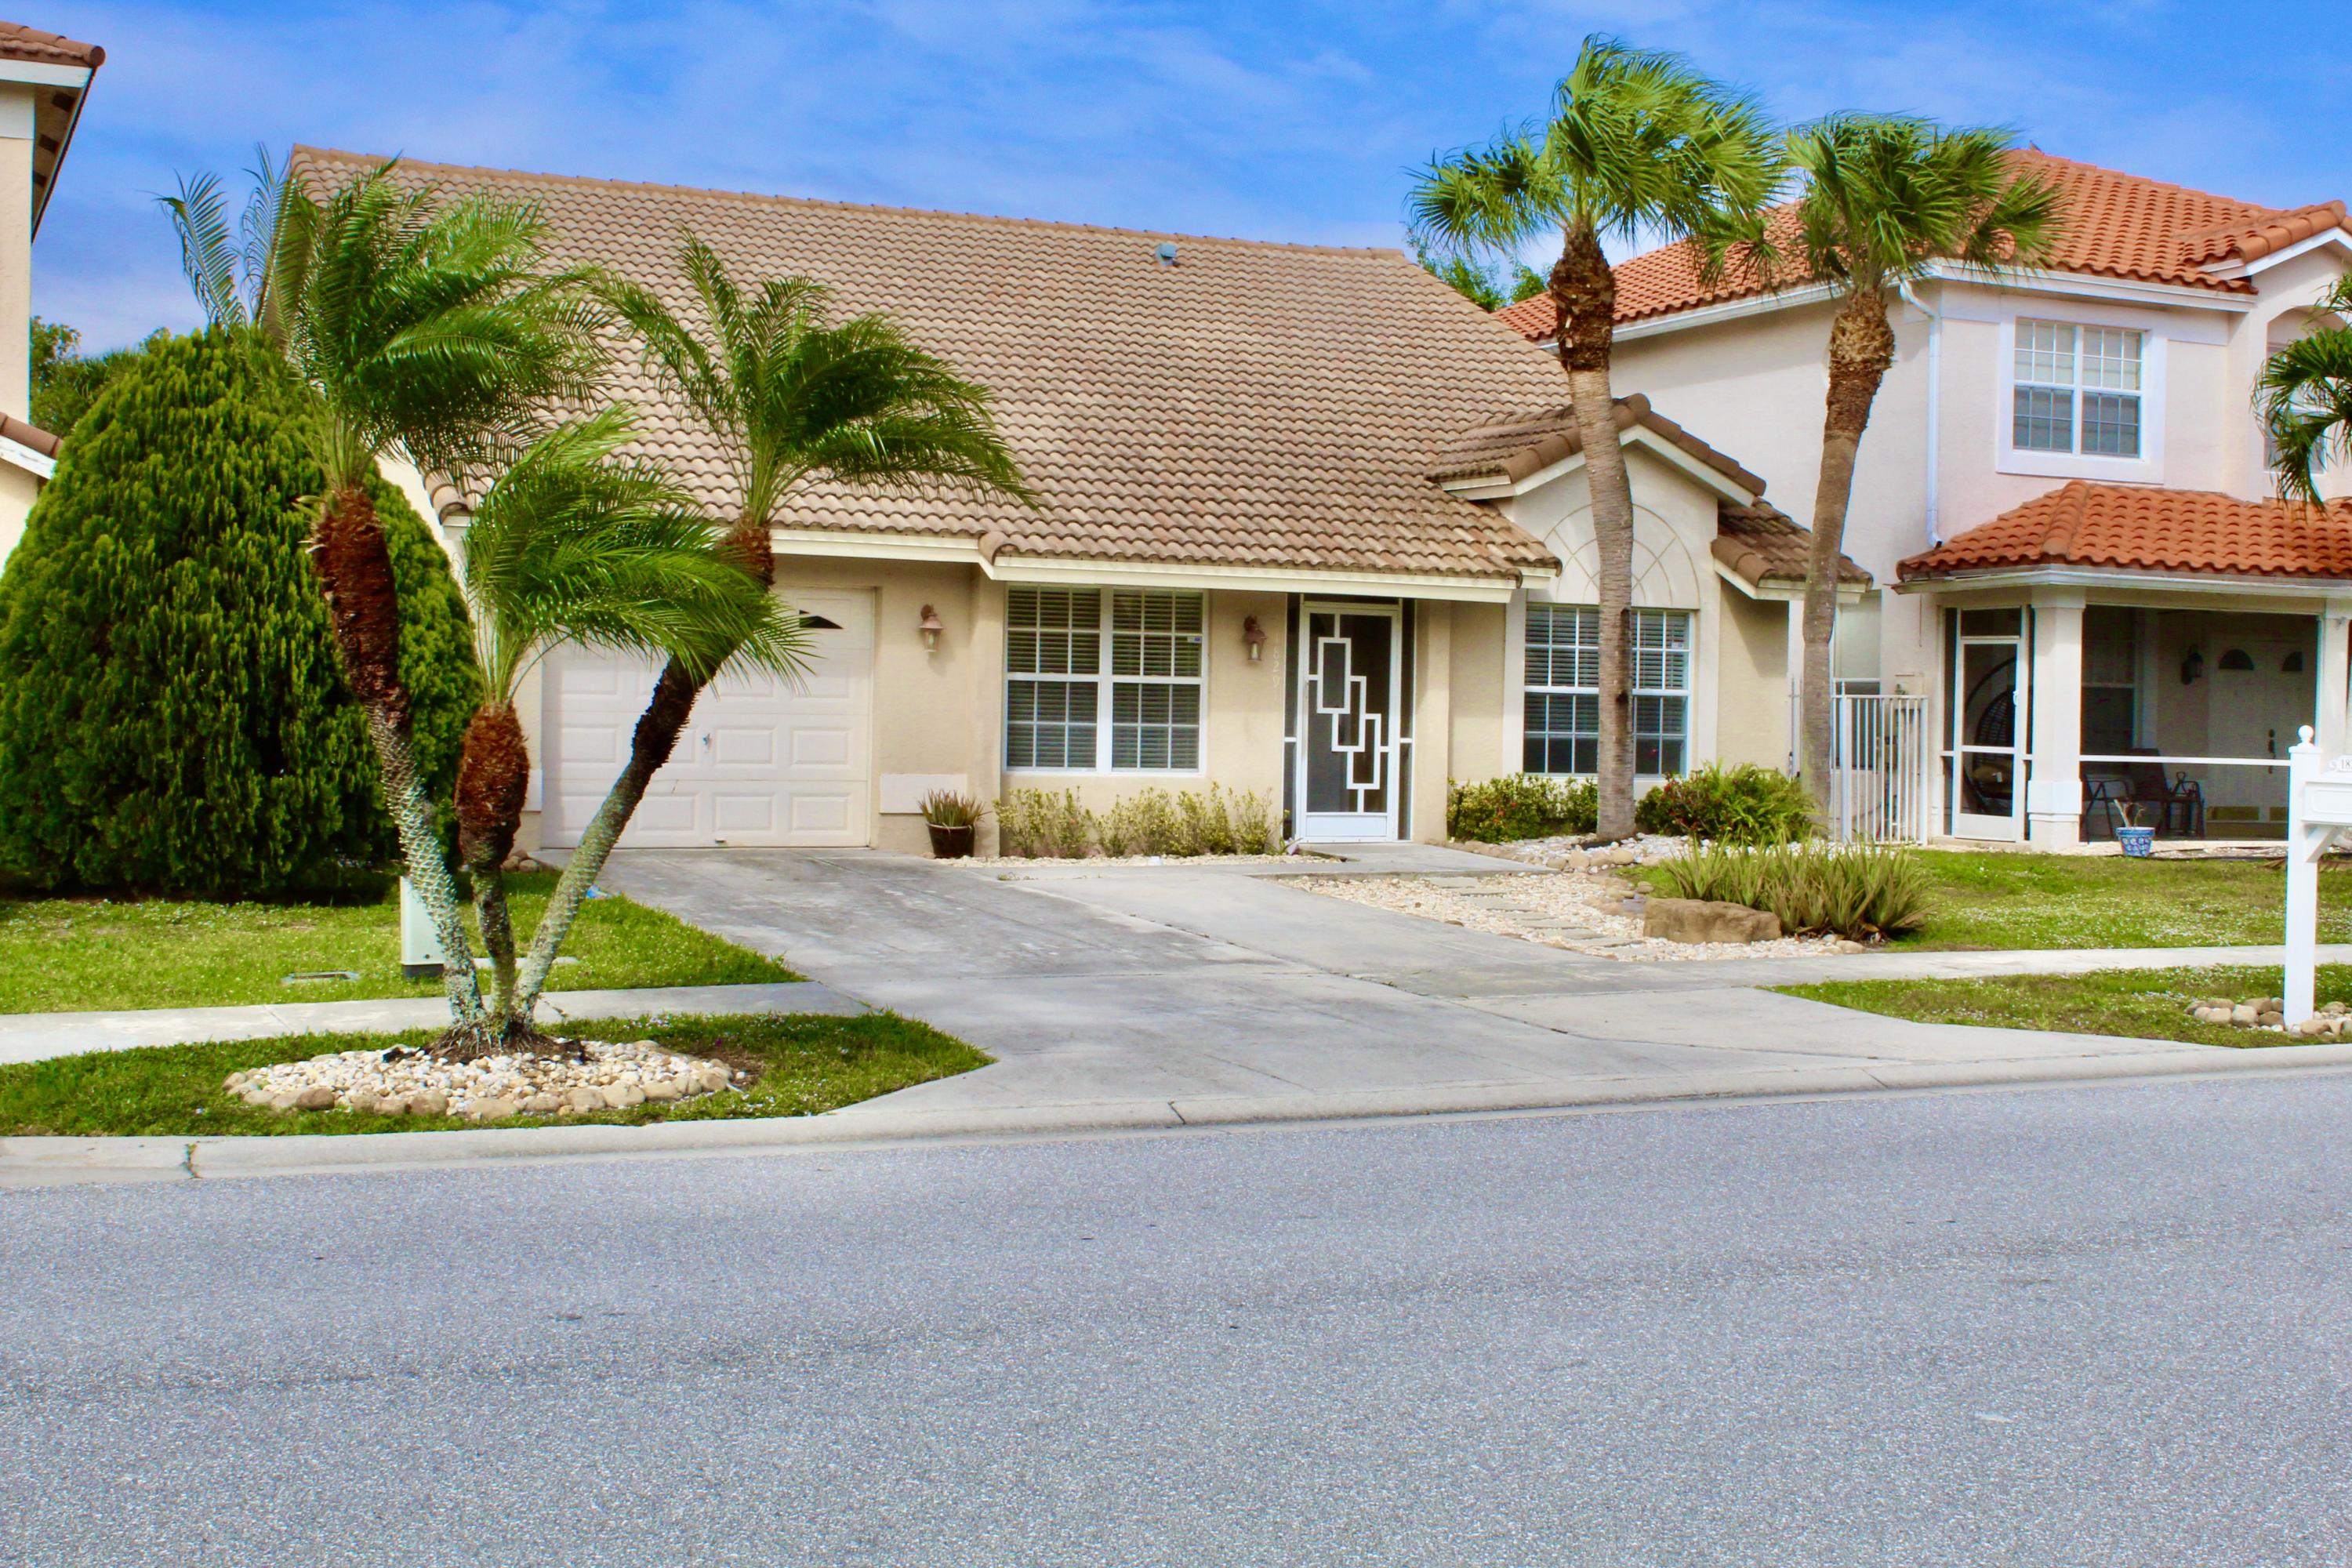 a front view of a house with a yard and palm trees